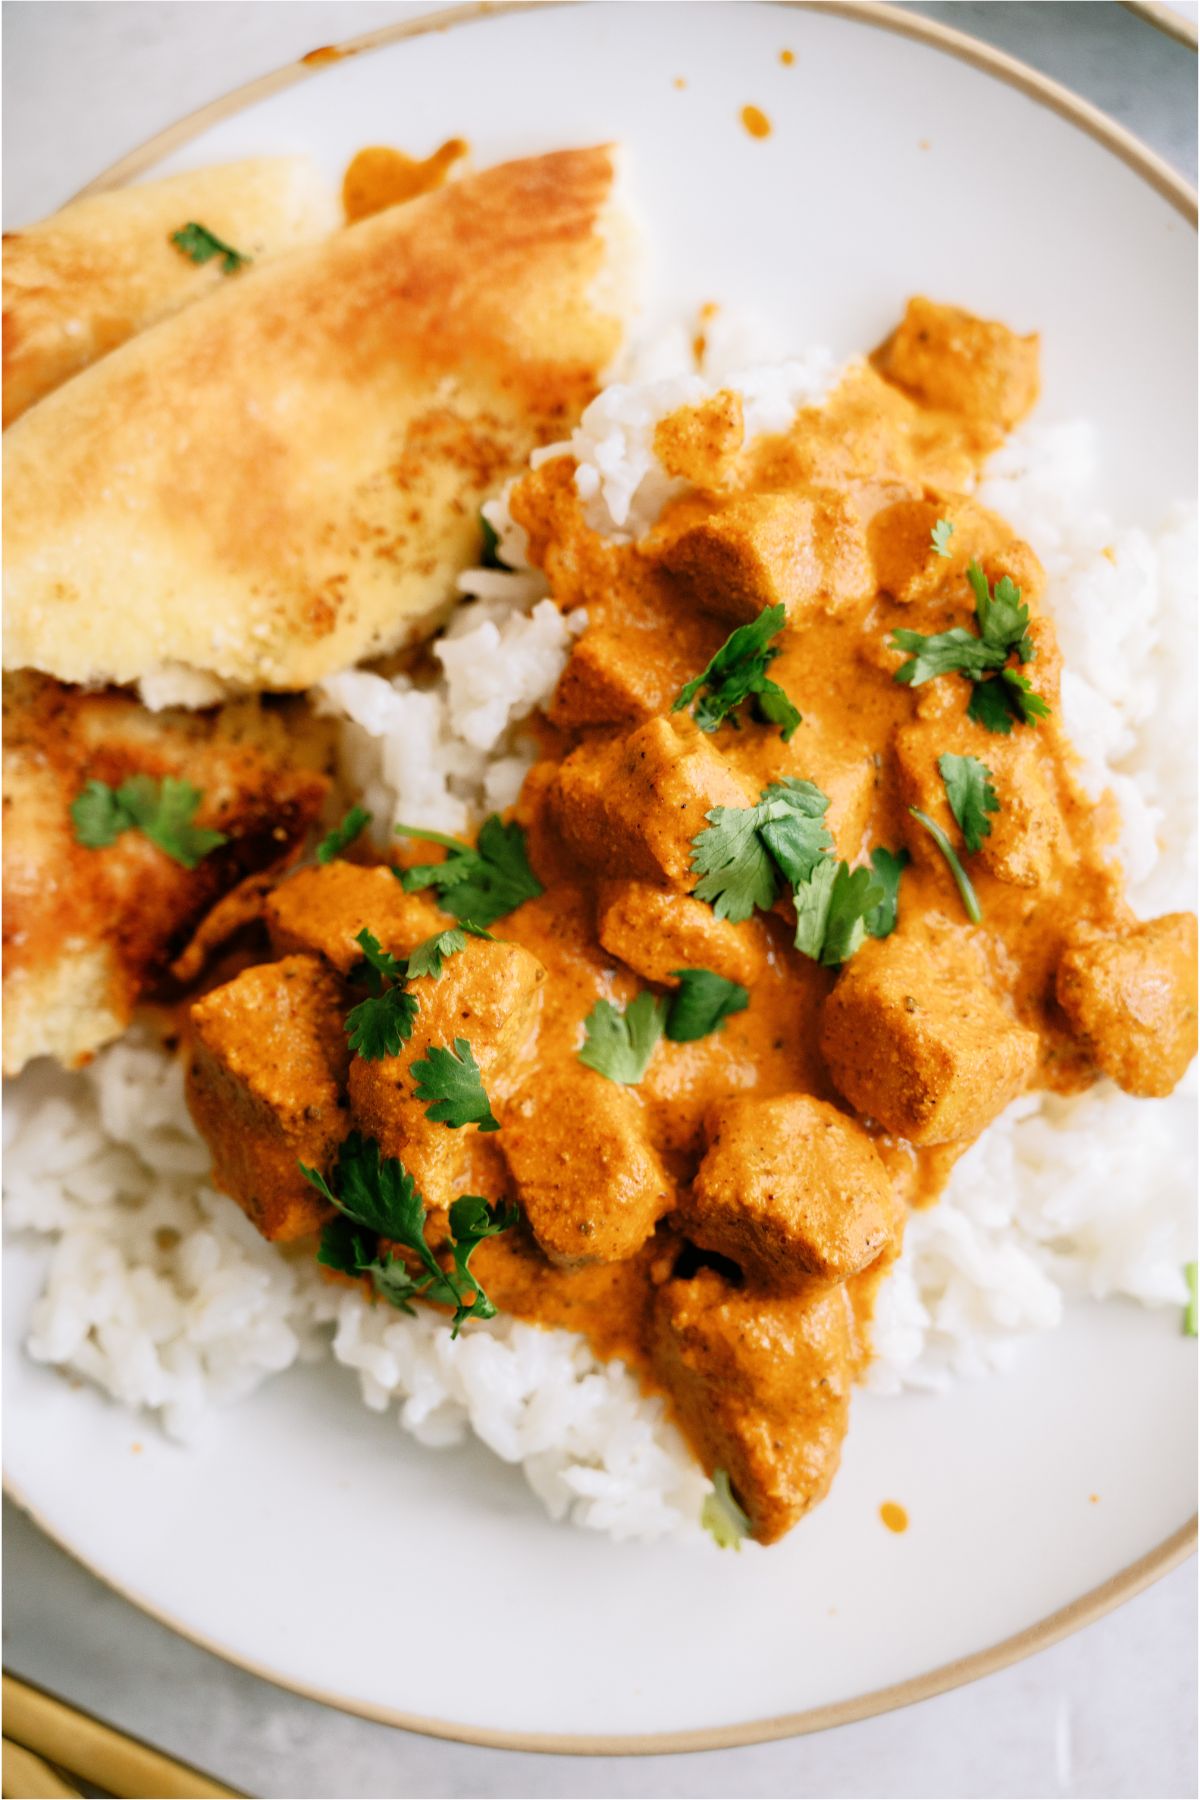 A plate with a serving of Instant Pot Chicken Tikka Masala over rice with Naan Bread